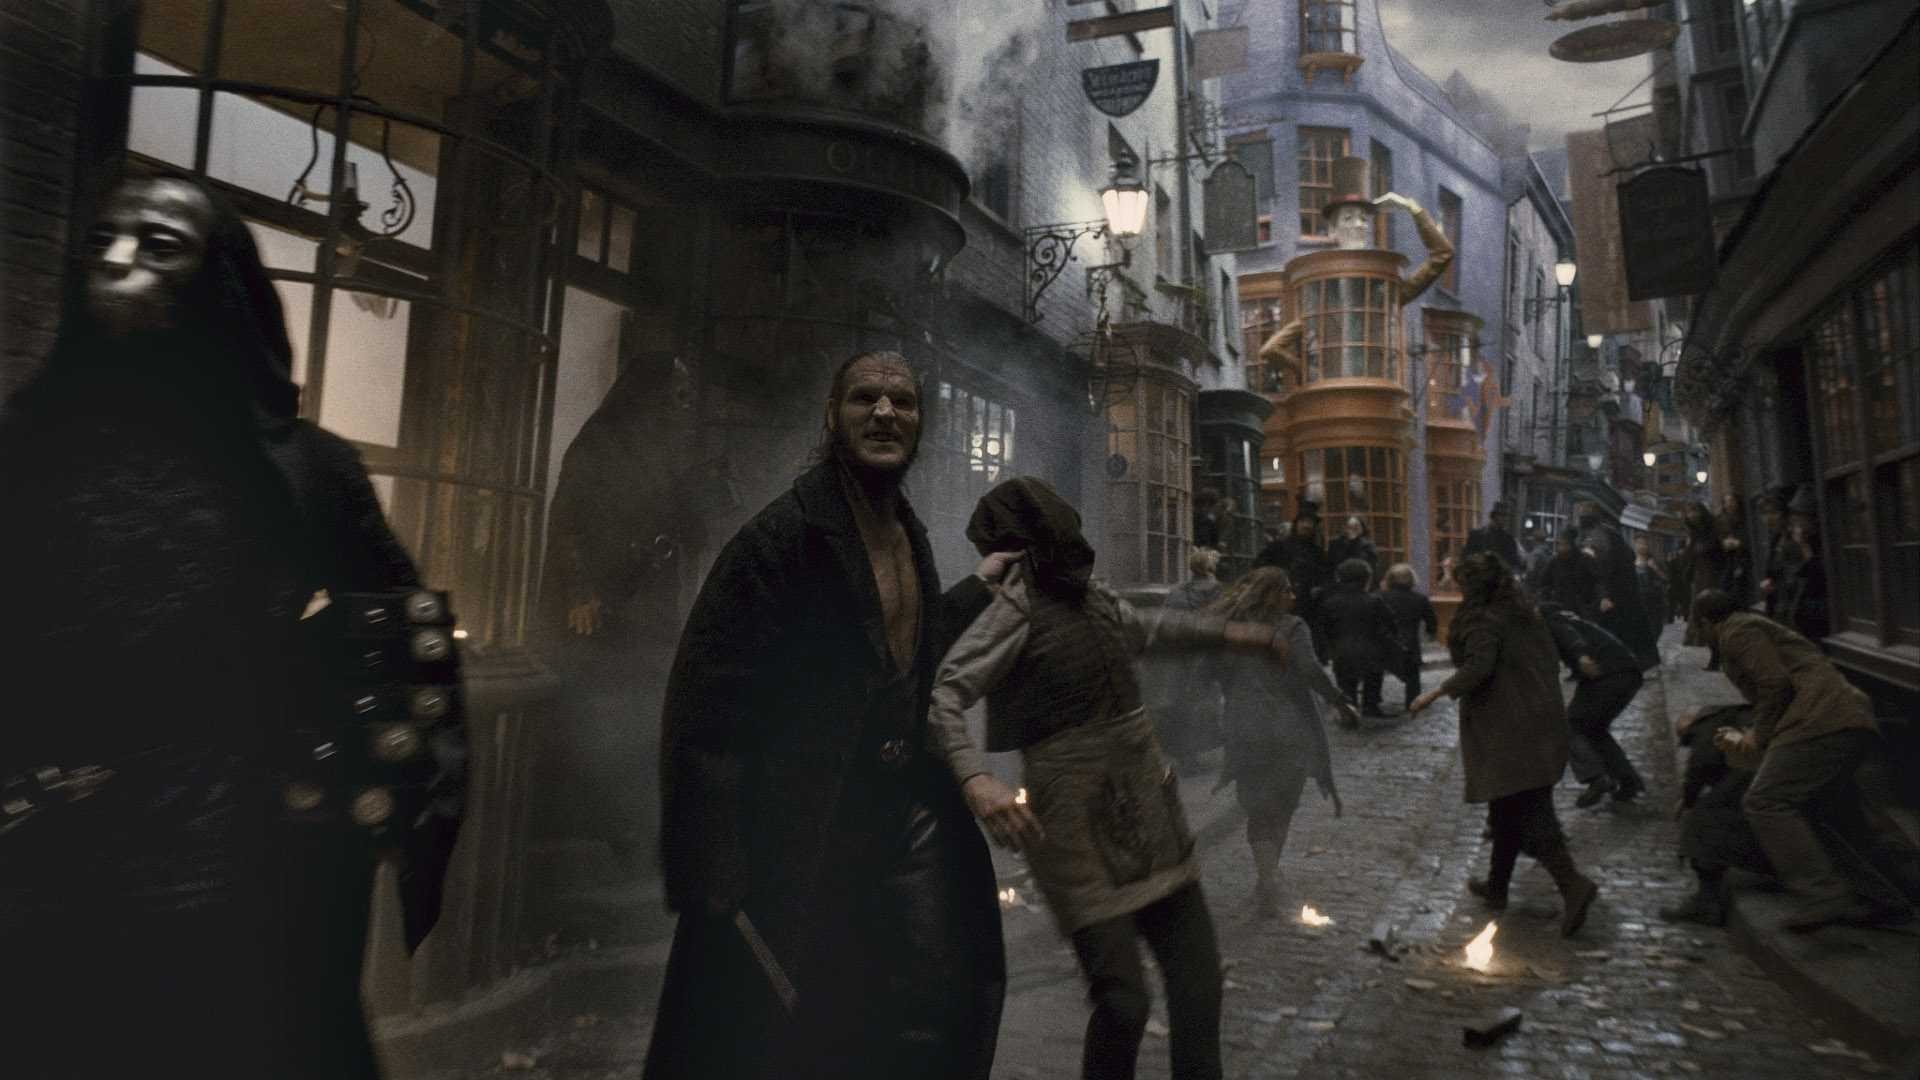 1920x1080 Crowd Control Thoughs for Access to Diagon Alley & Hogwarts Express  (Opening & Summer 2014)